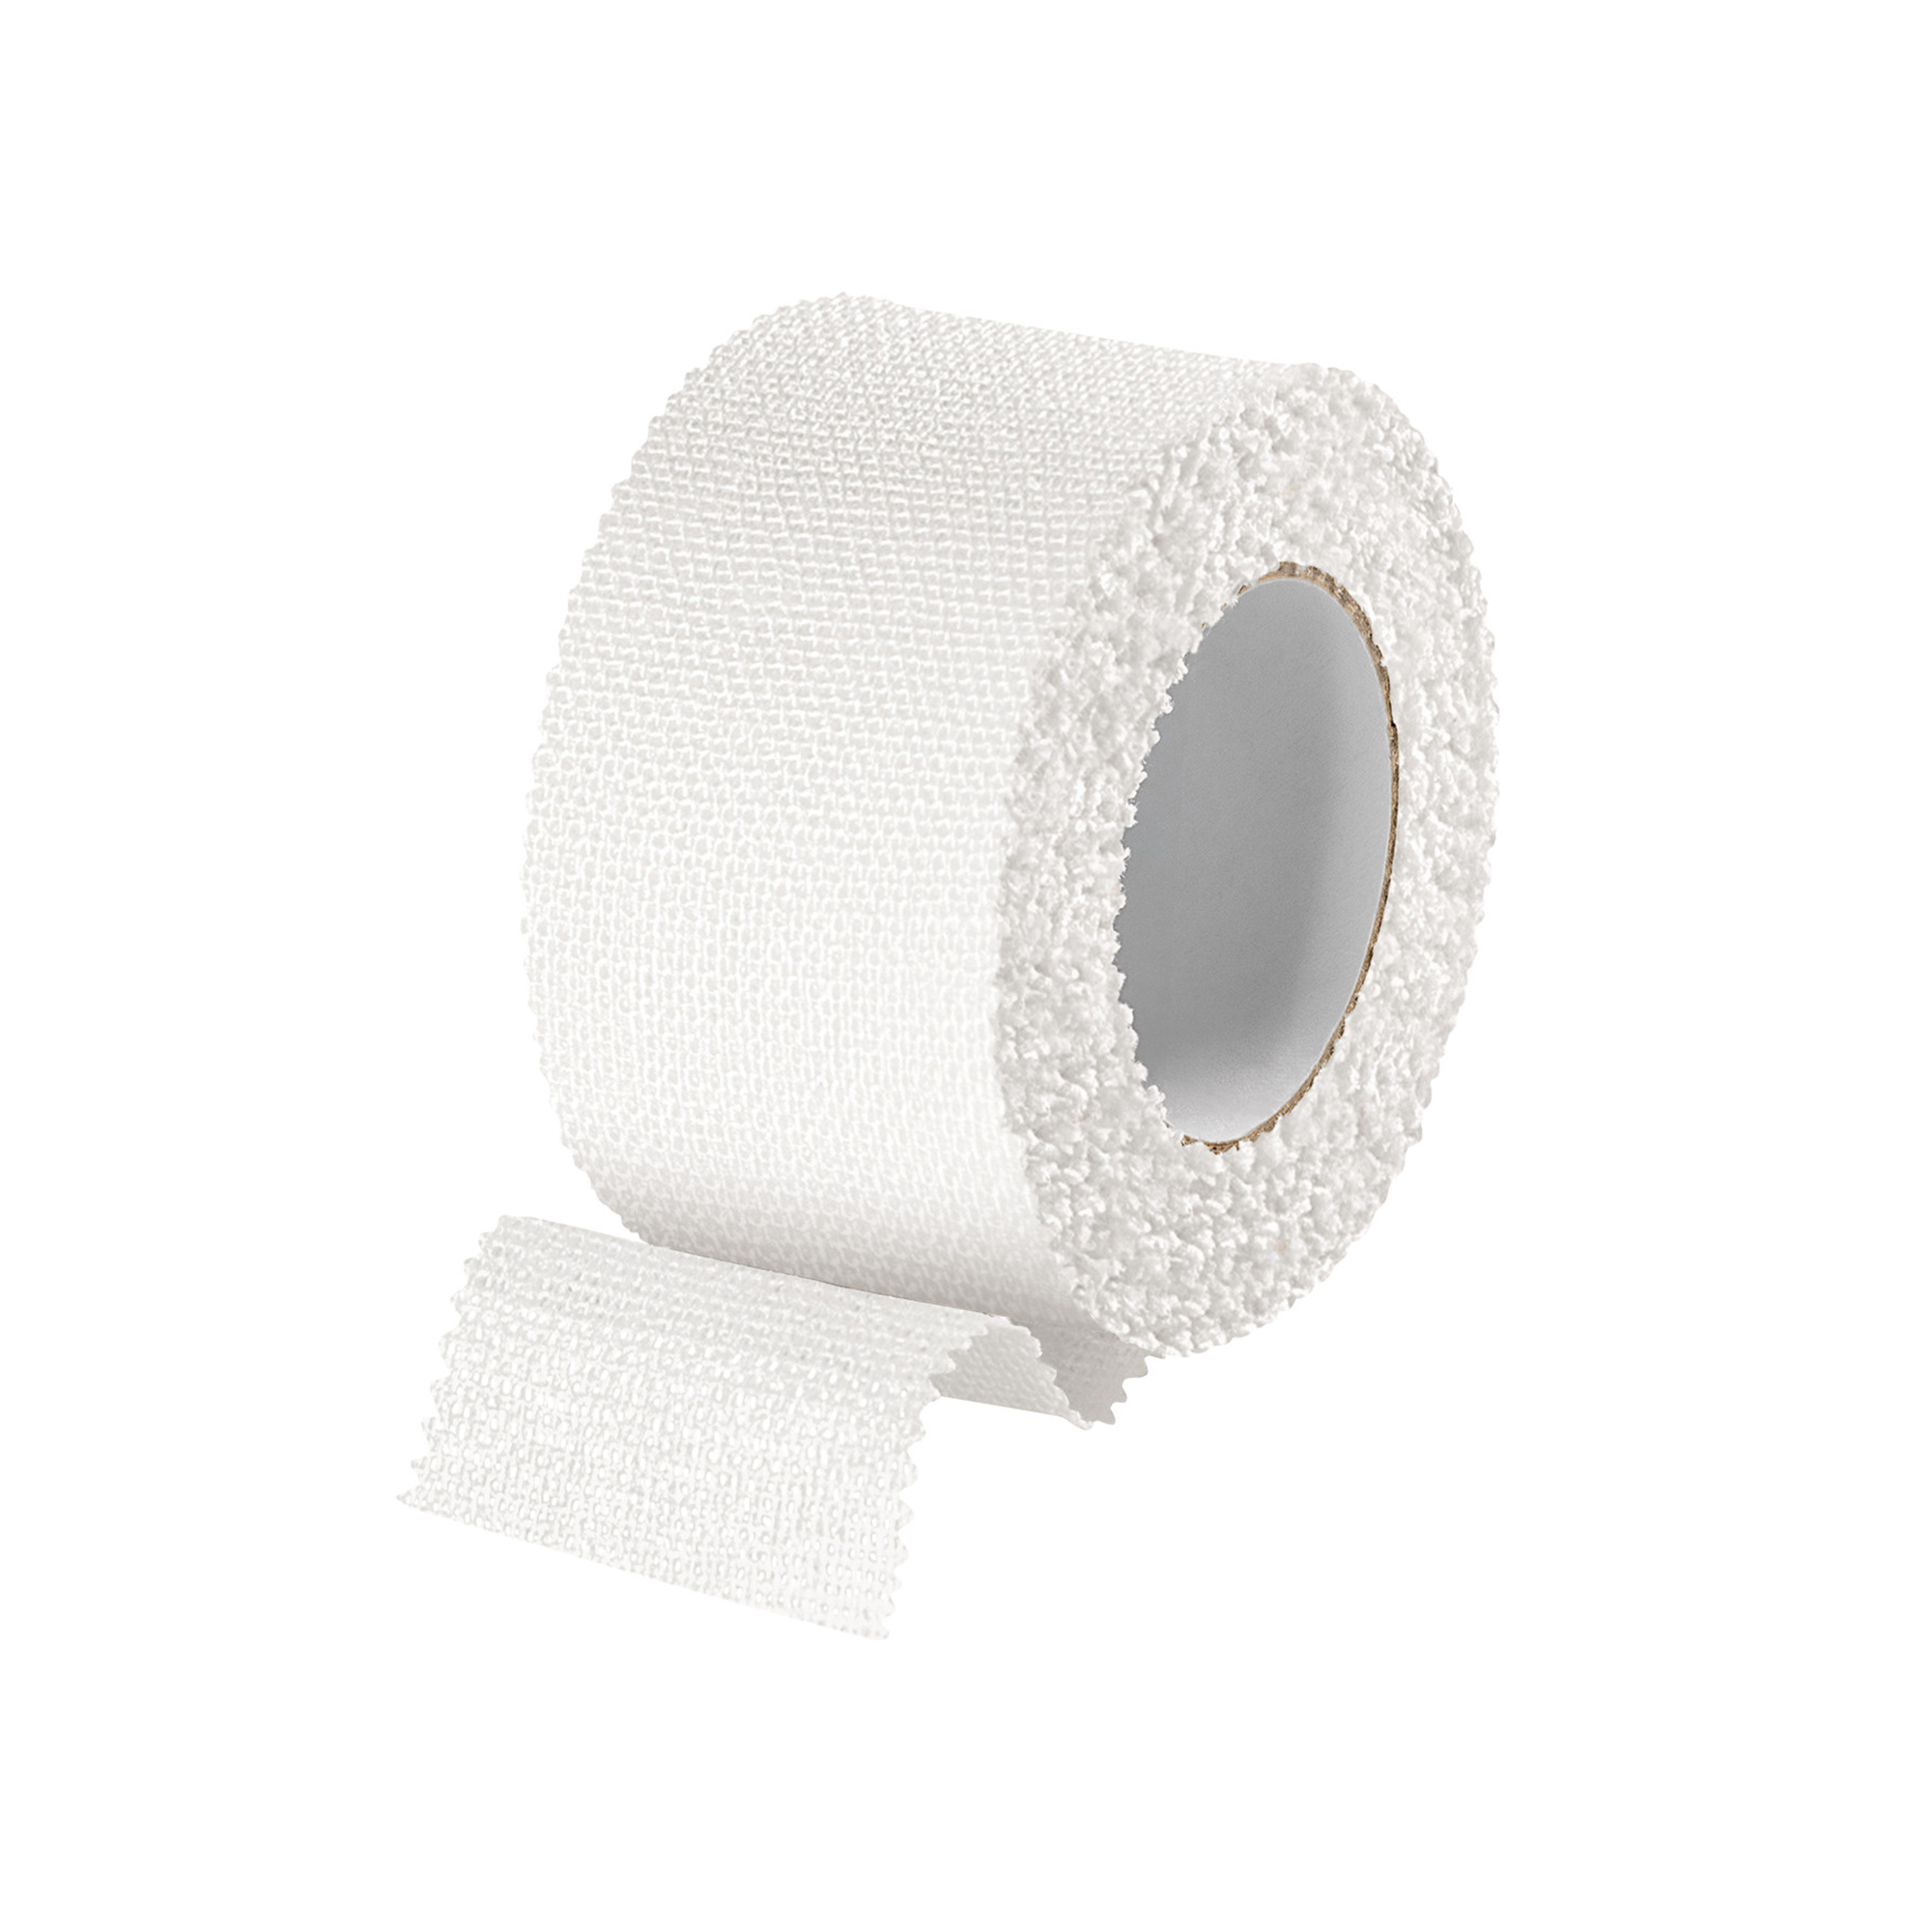 Hartmann Nature Care Fixation plaster 2.5 cm x 5 m on paper roll, individually packed in box